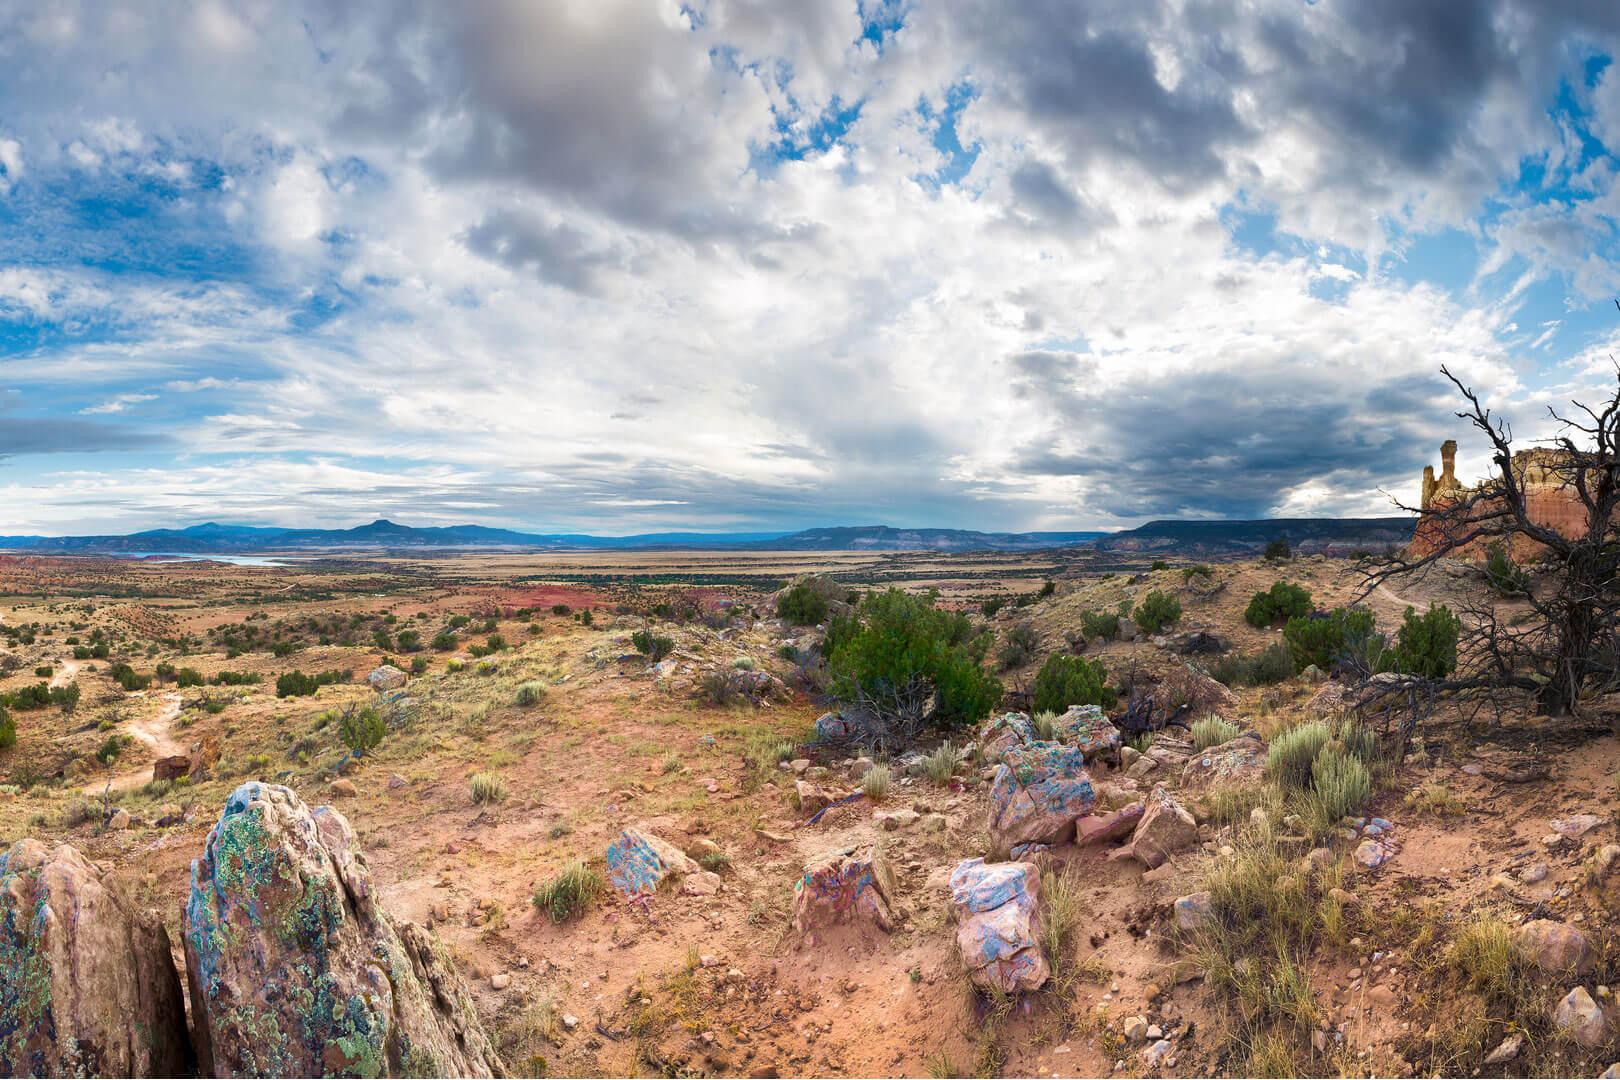 Promo image for article on New Mexico ag, showing mountains, rocks, sagebrush, and scattered clouds